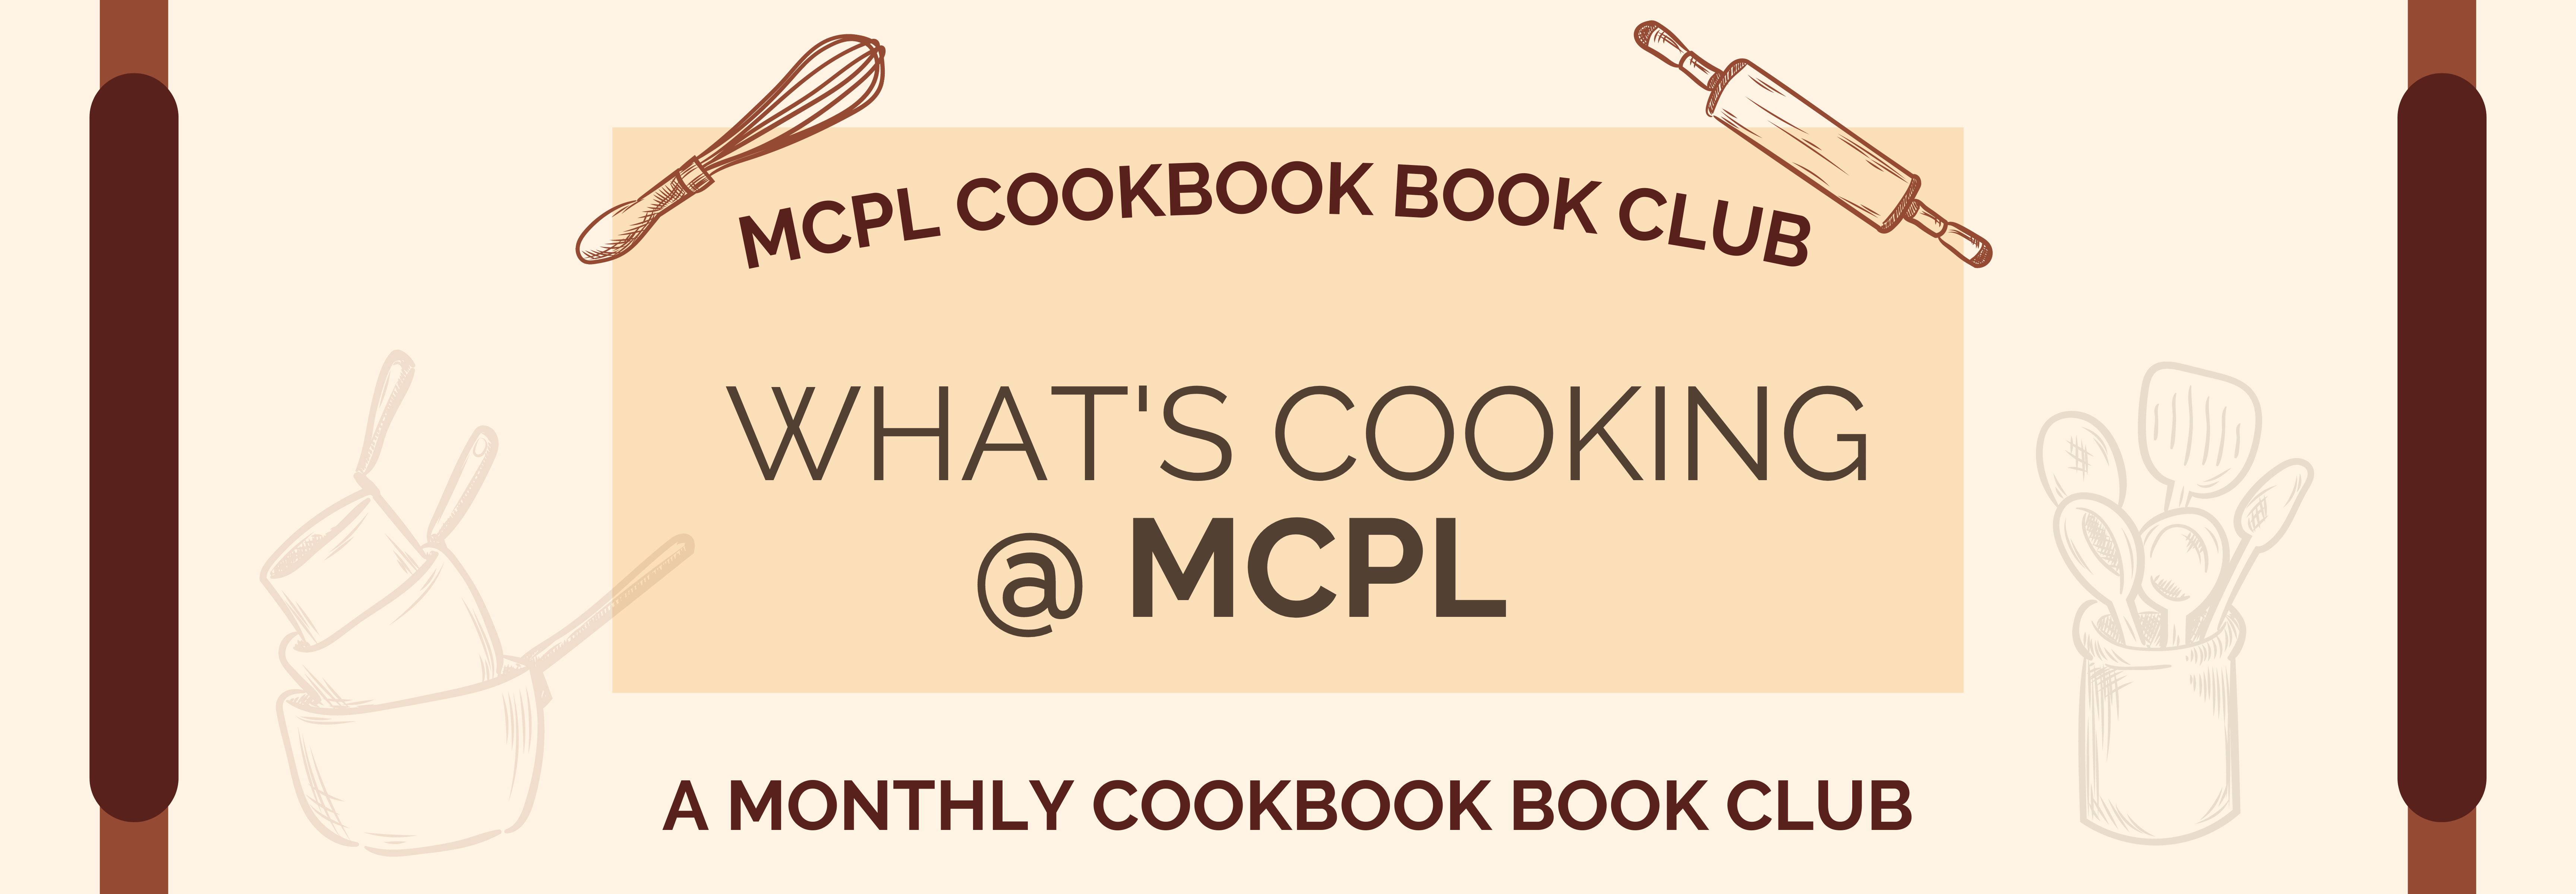 What's Cooking @ MCPL